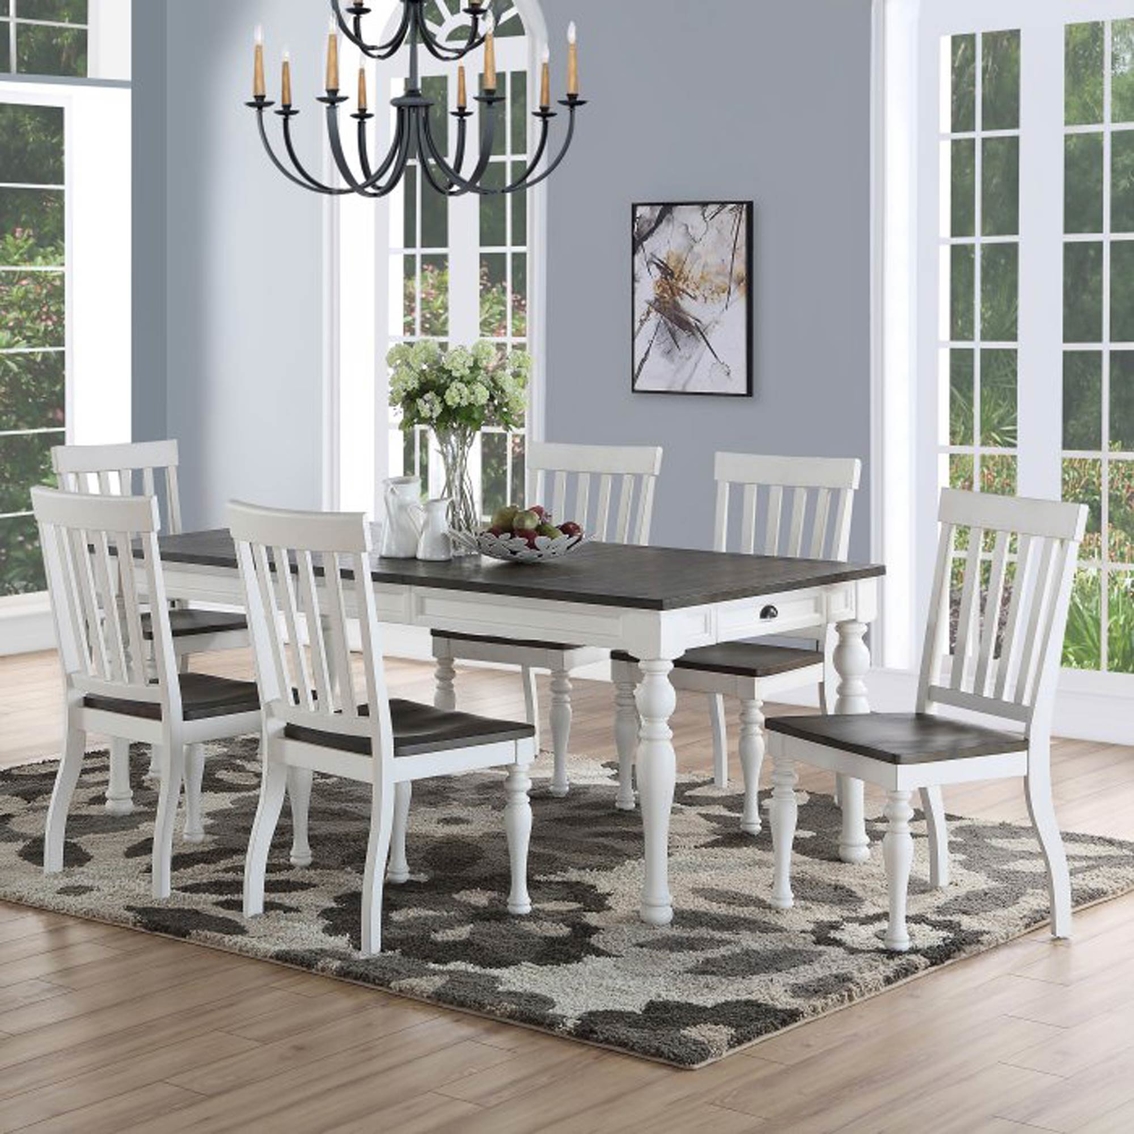 Steve Silver Joanna Two Tone 7 pc. Dining Set - Image 5 of 5